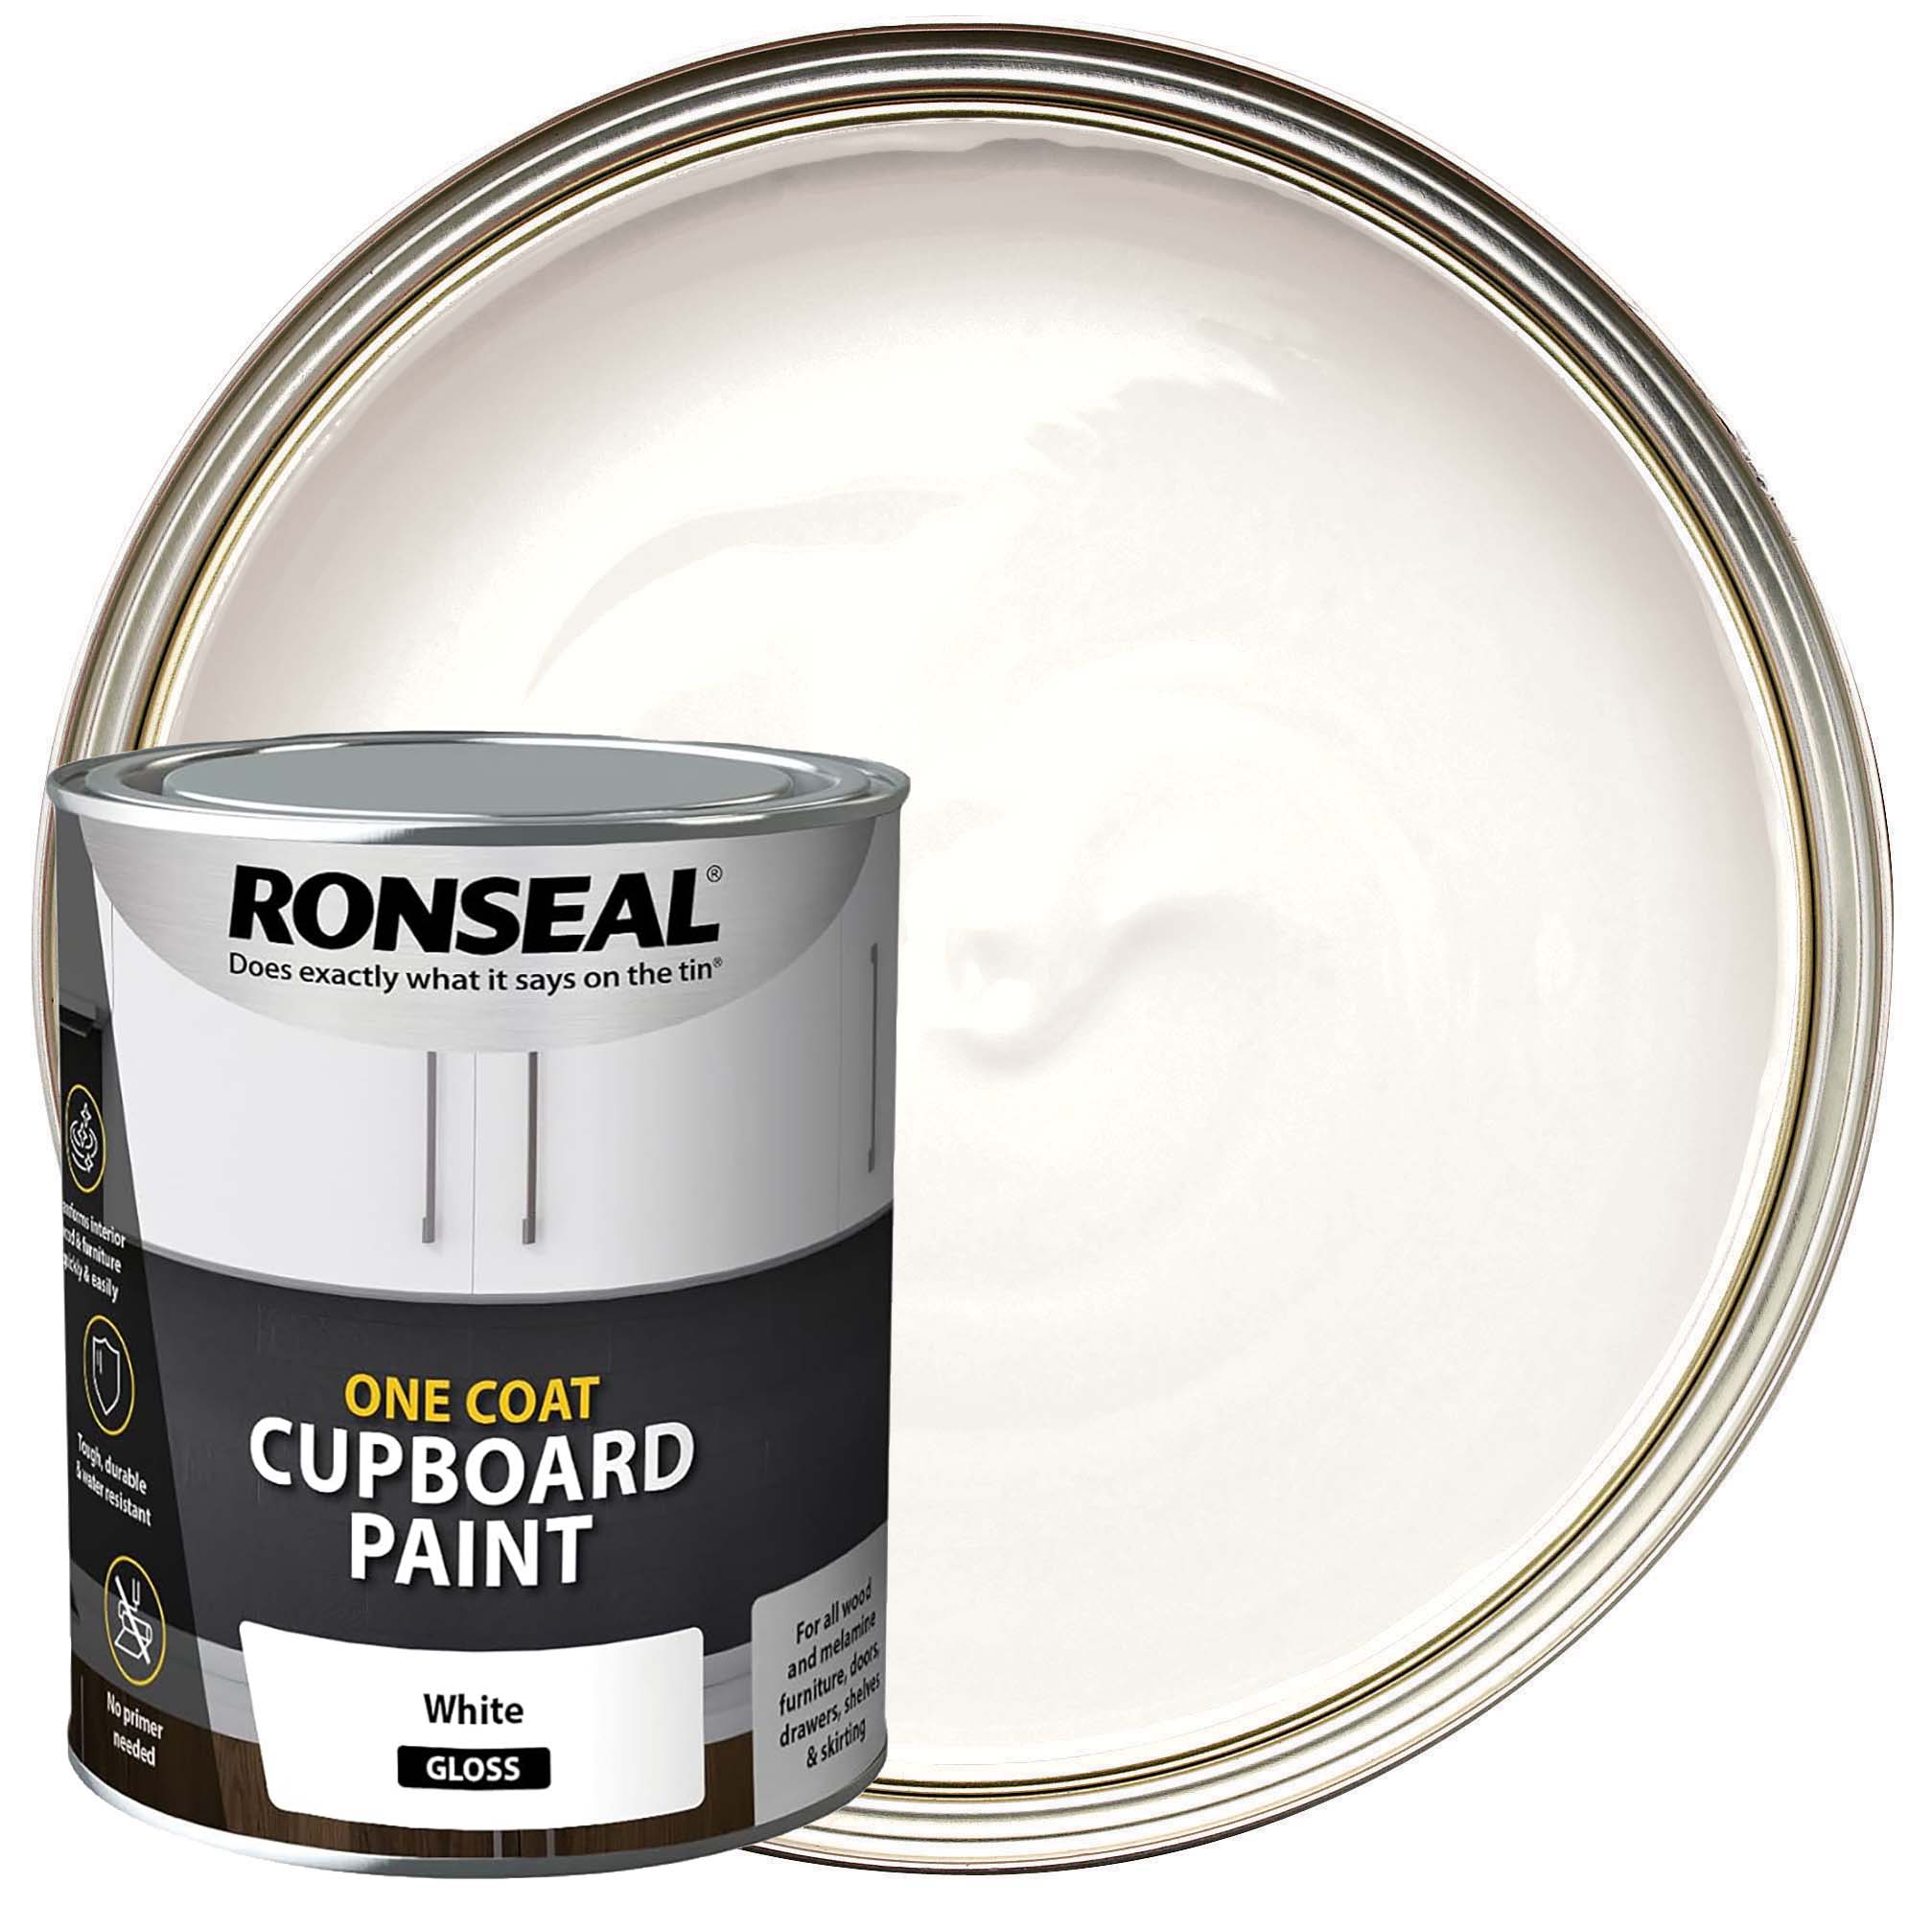 Image of Ronseal One Coat Cupboard & Furniture Paint - White Gloss 750ml